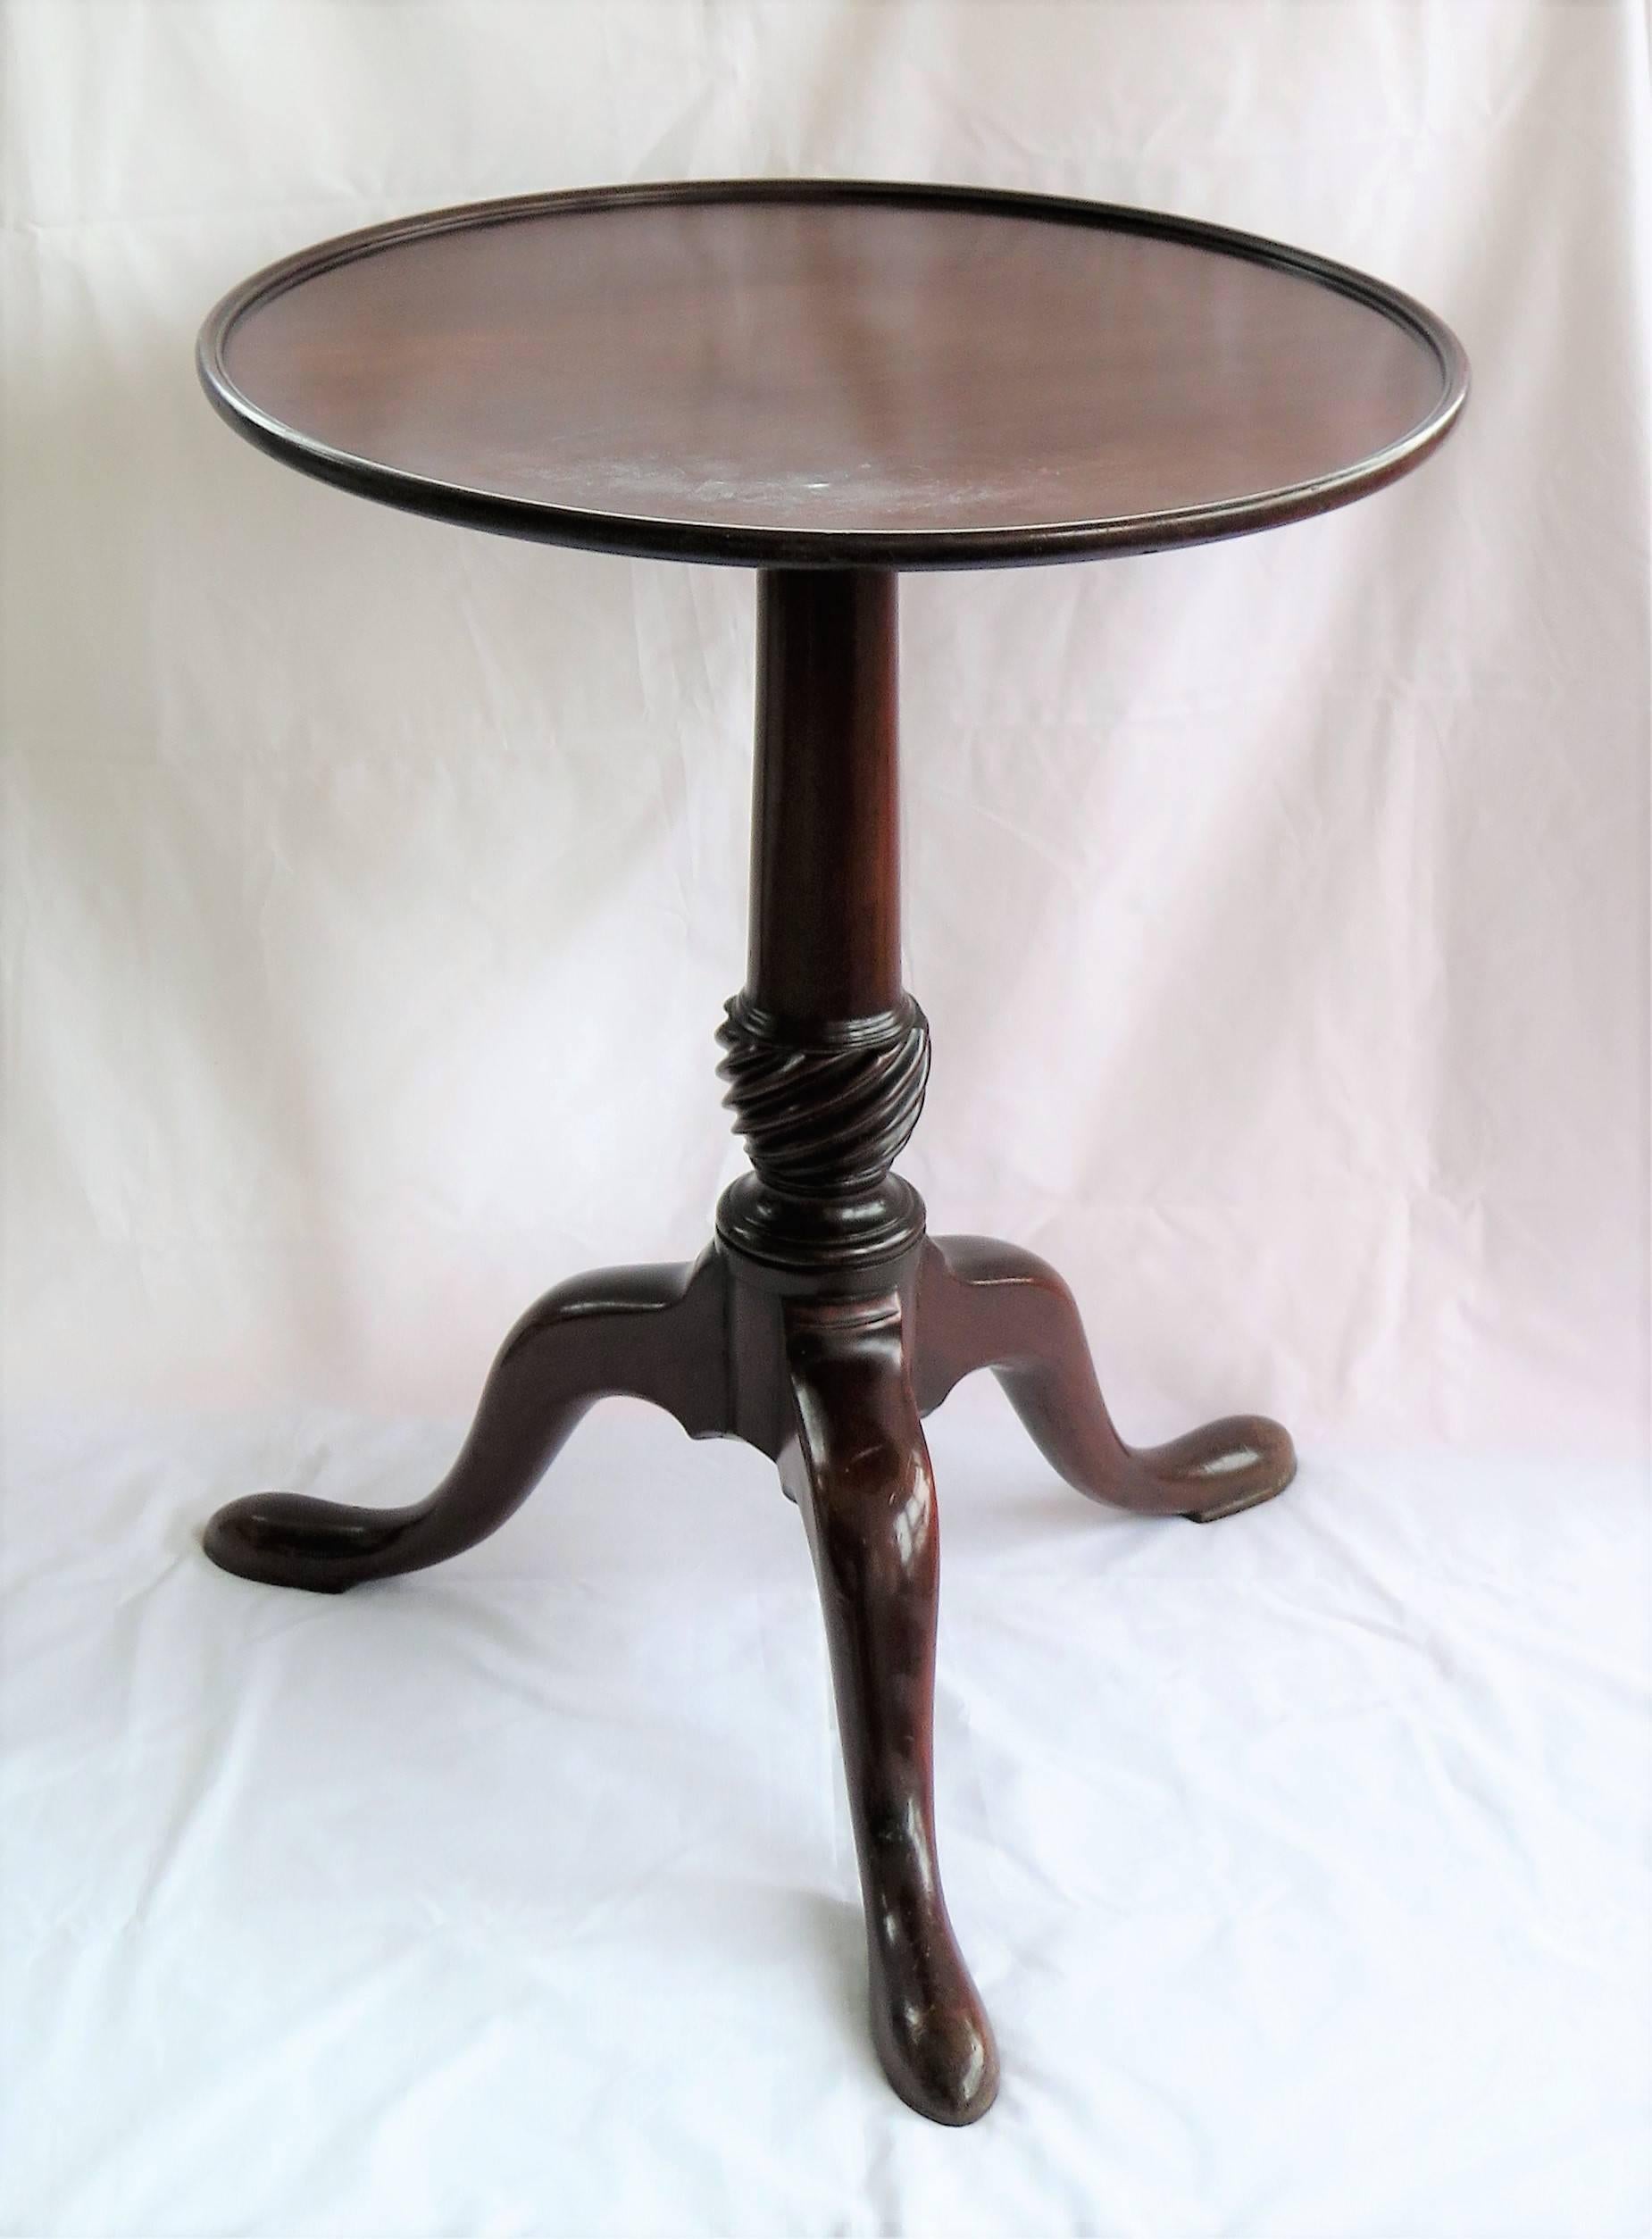 Chippendale George 11 Period Tripod Table Mahogany Fixed Dished Top, English circa 1750